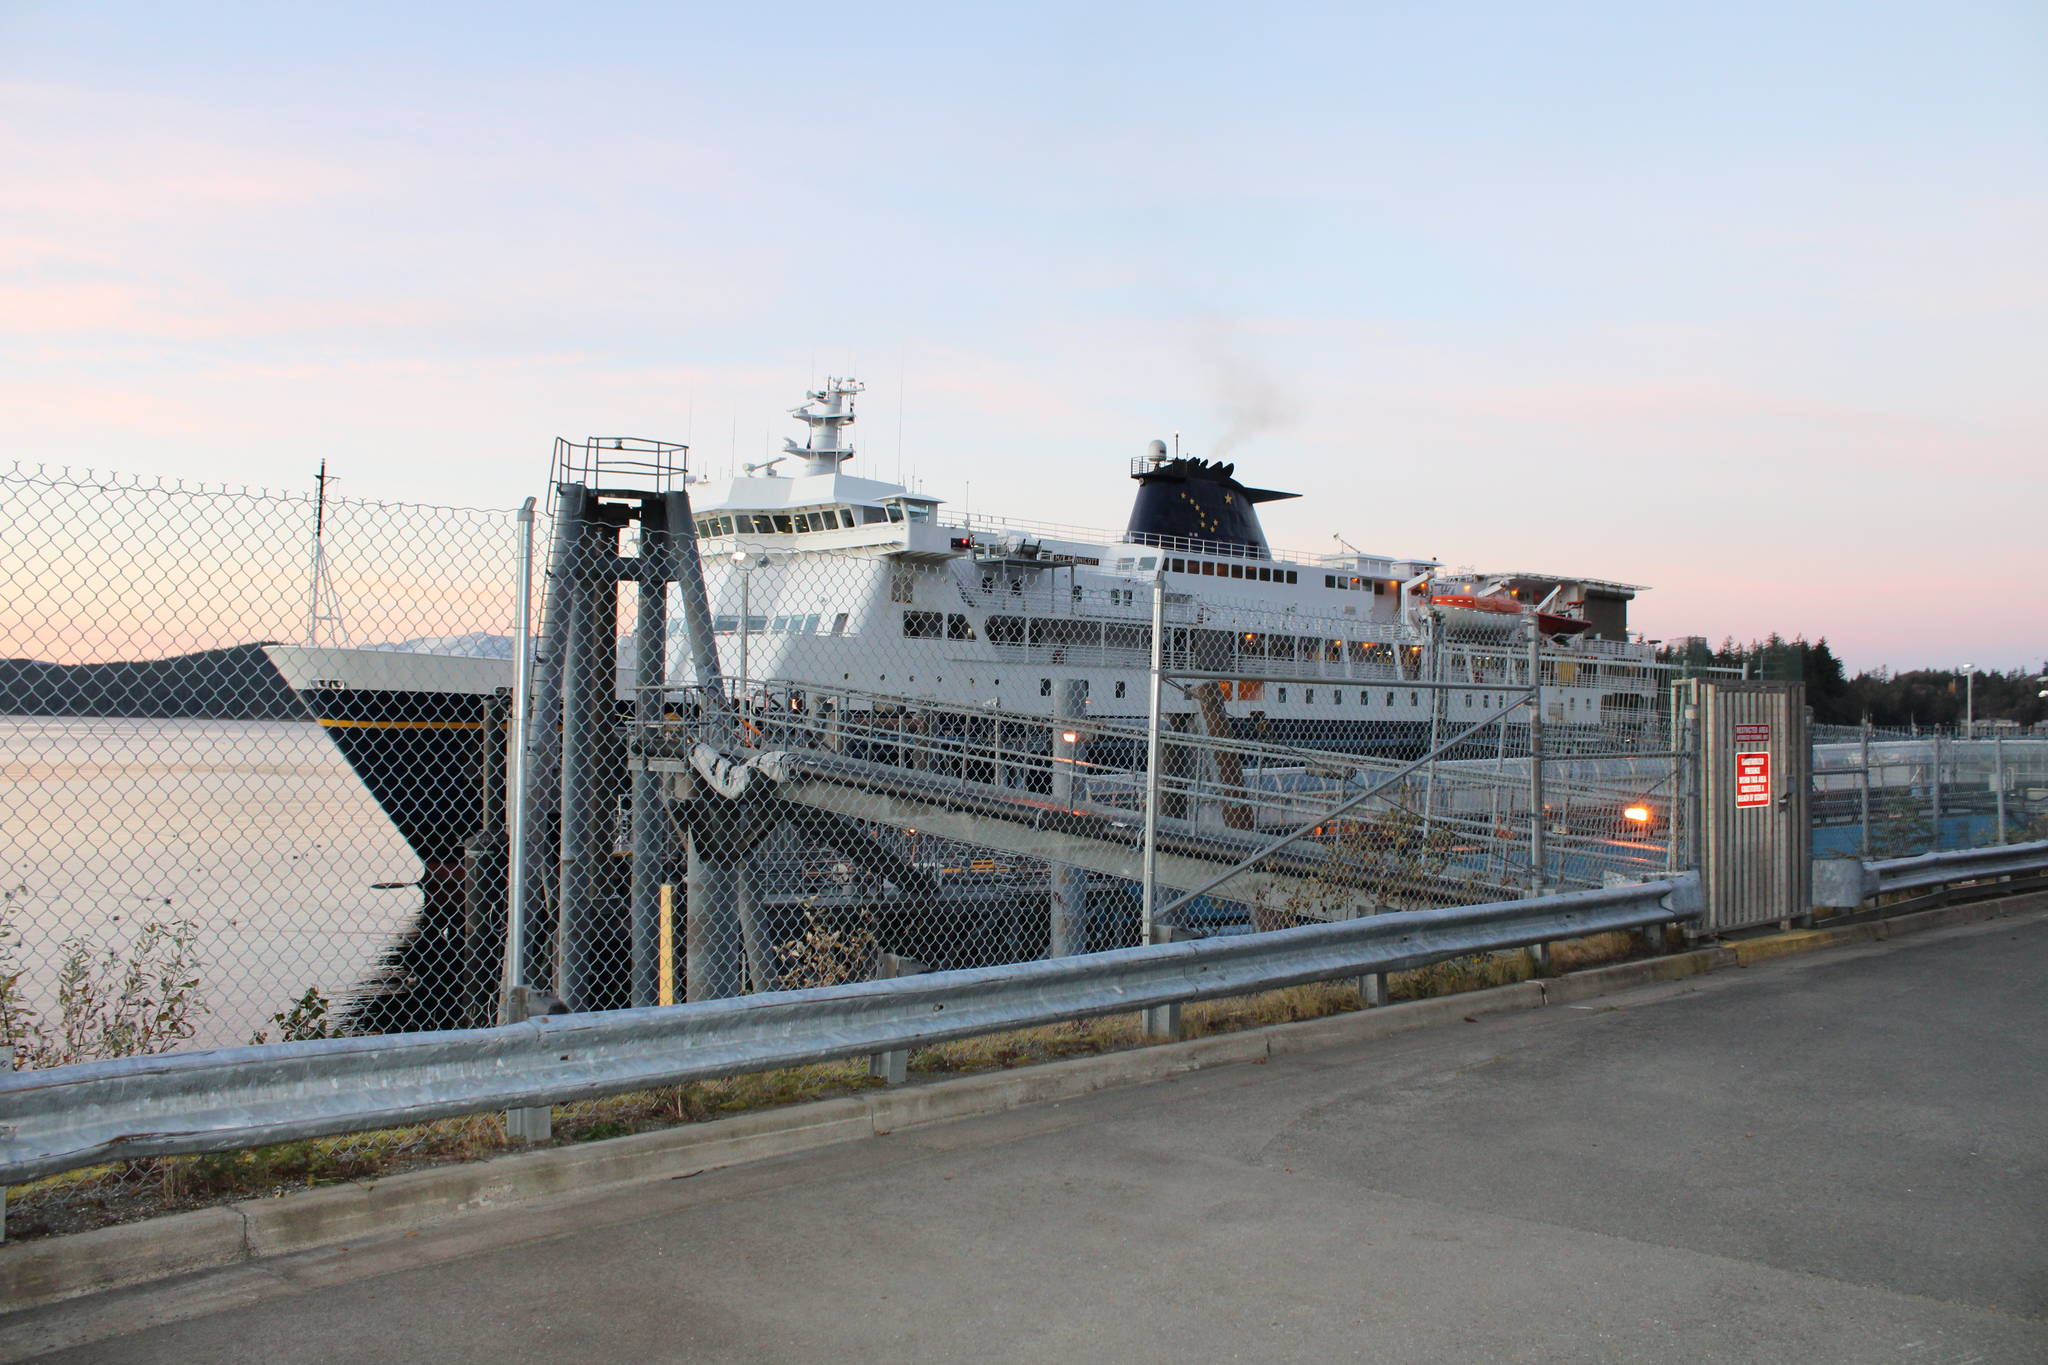 The MV Kennicott, docked at the Auke Bay Ferry Terminal, was out of commission awaiting repairs on Friday, Oct. 23, 2020. Chairman of the Alaska Marine Highway Reshaping Workgroup Admiral Tom Barrett said the system’s inability to plan long-term was hindering its ability to be effective. (Ben Hohenstatt / Juneau Empire)